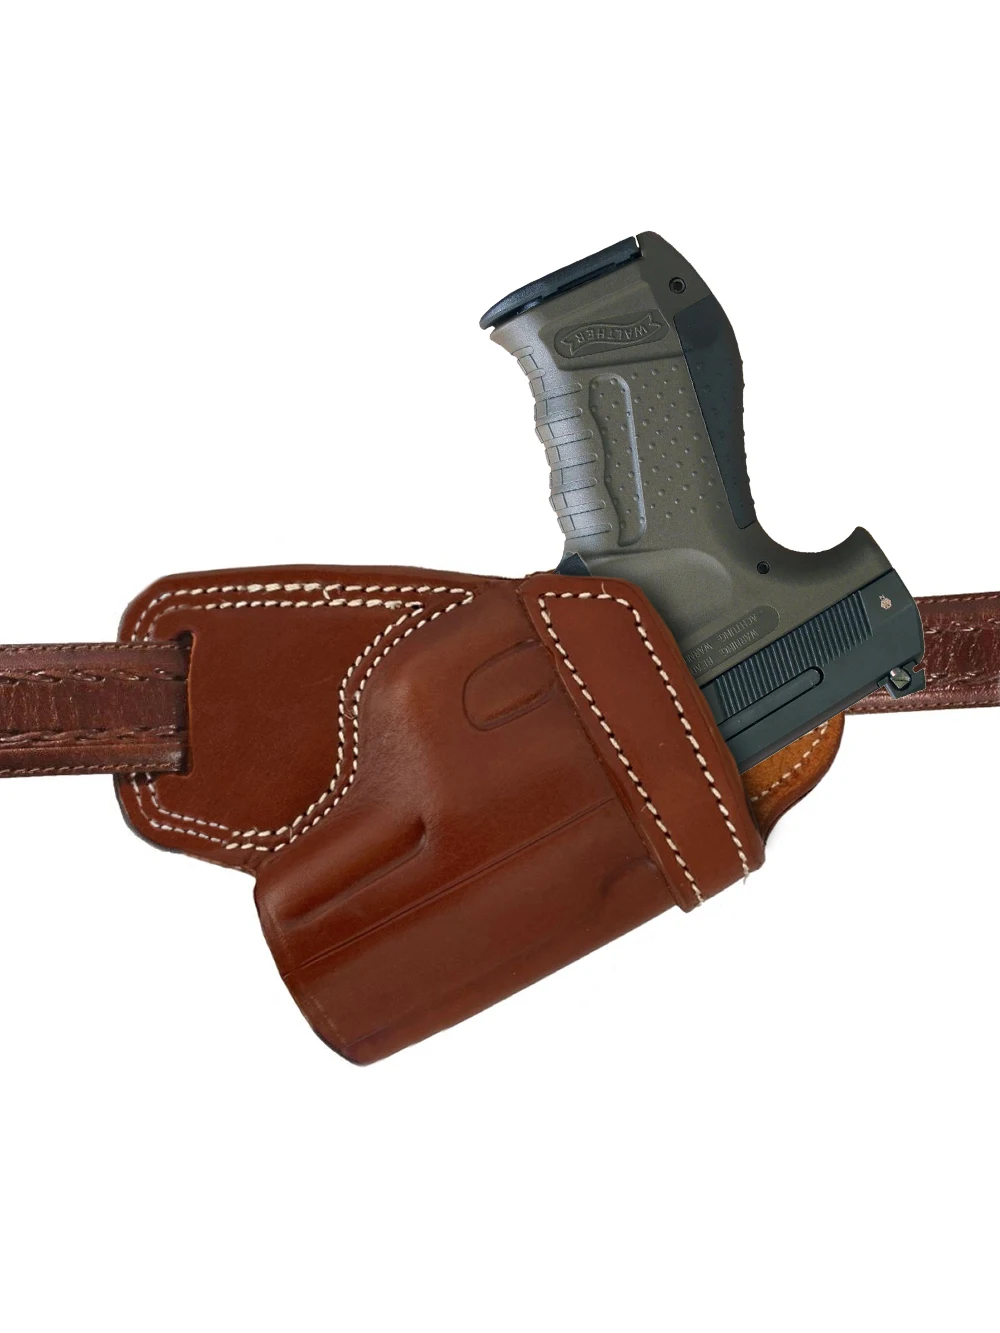 

Leather Gun Holster For Ruger LC9 Fast Draw Owb Carry SOB Of Small Back Handmade Pistol Pouch Weapon Accessory Tactical Design